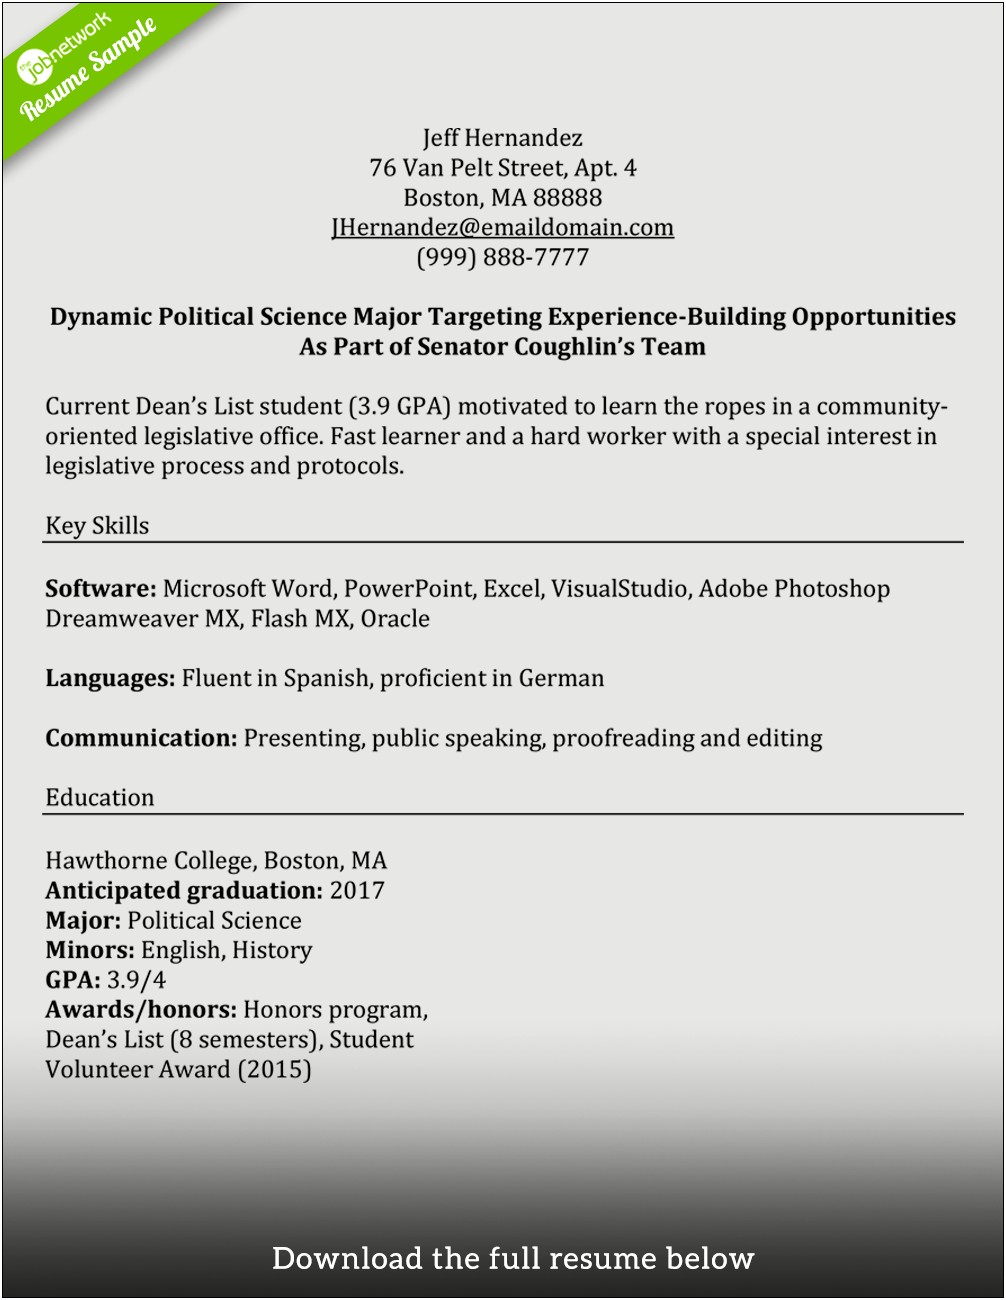 Example Of Resume For Internship Position